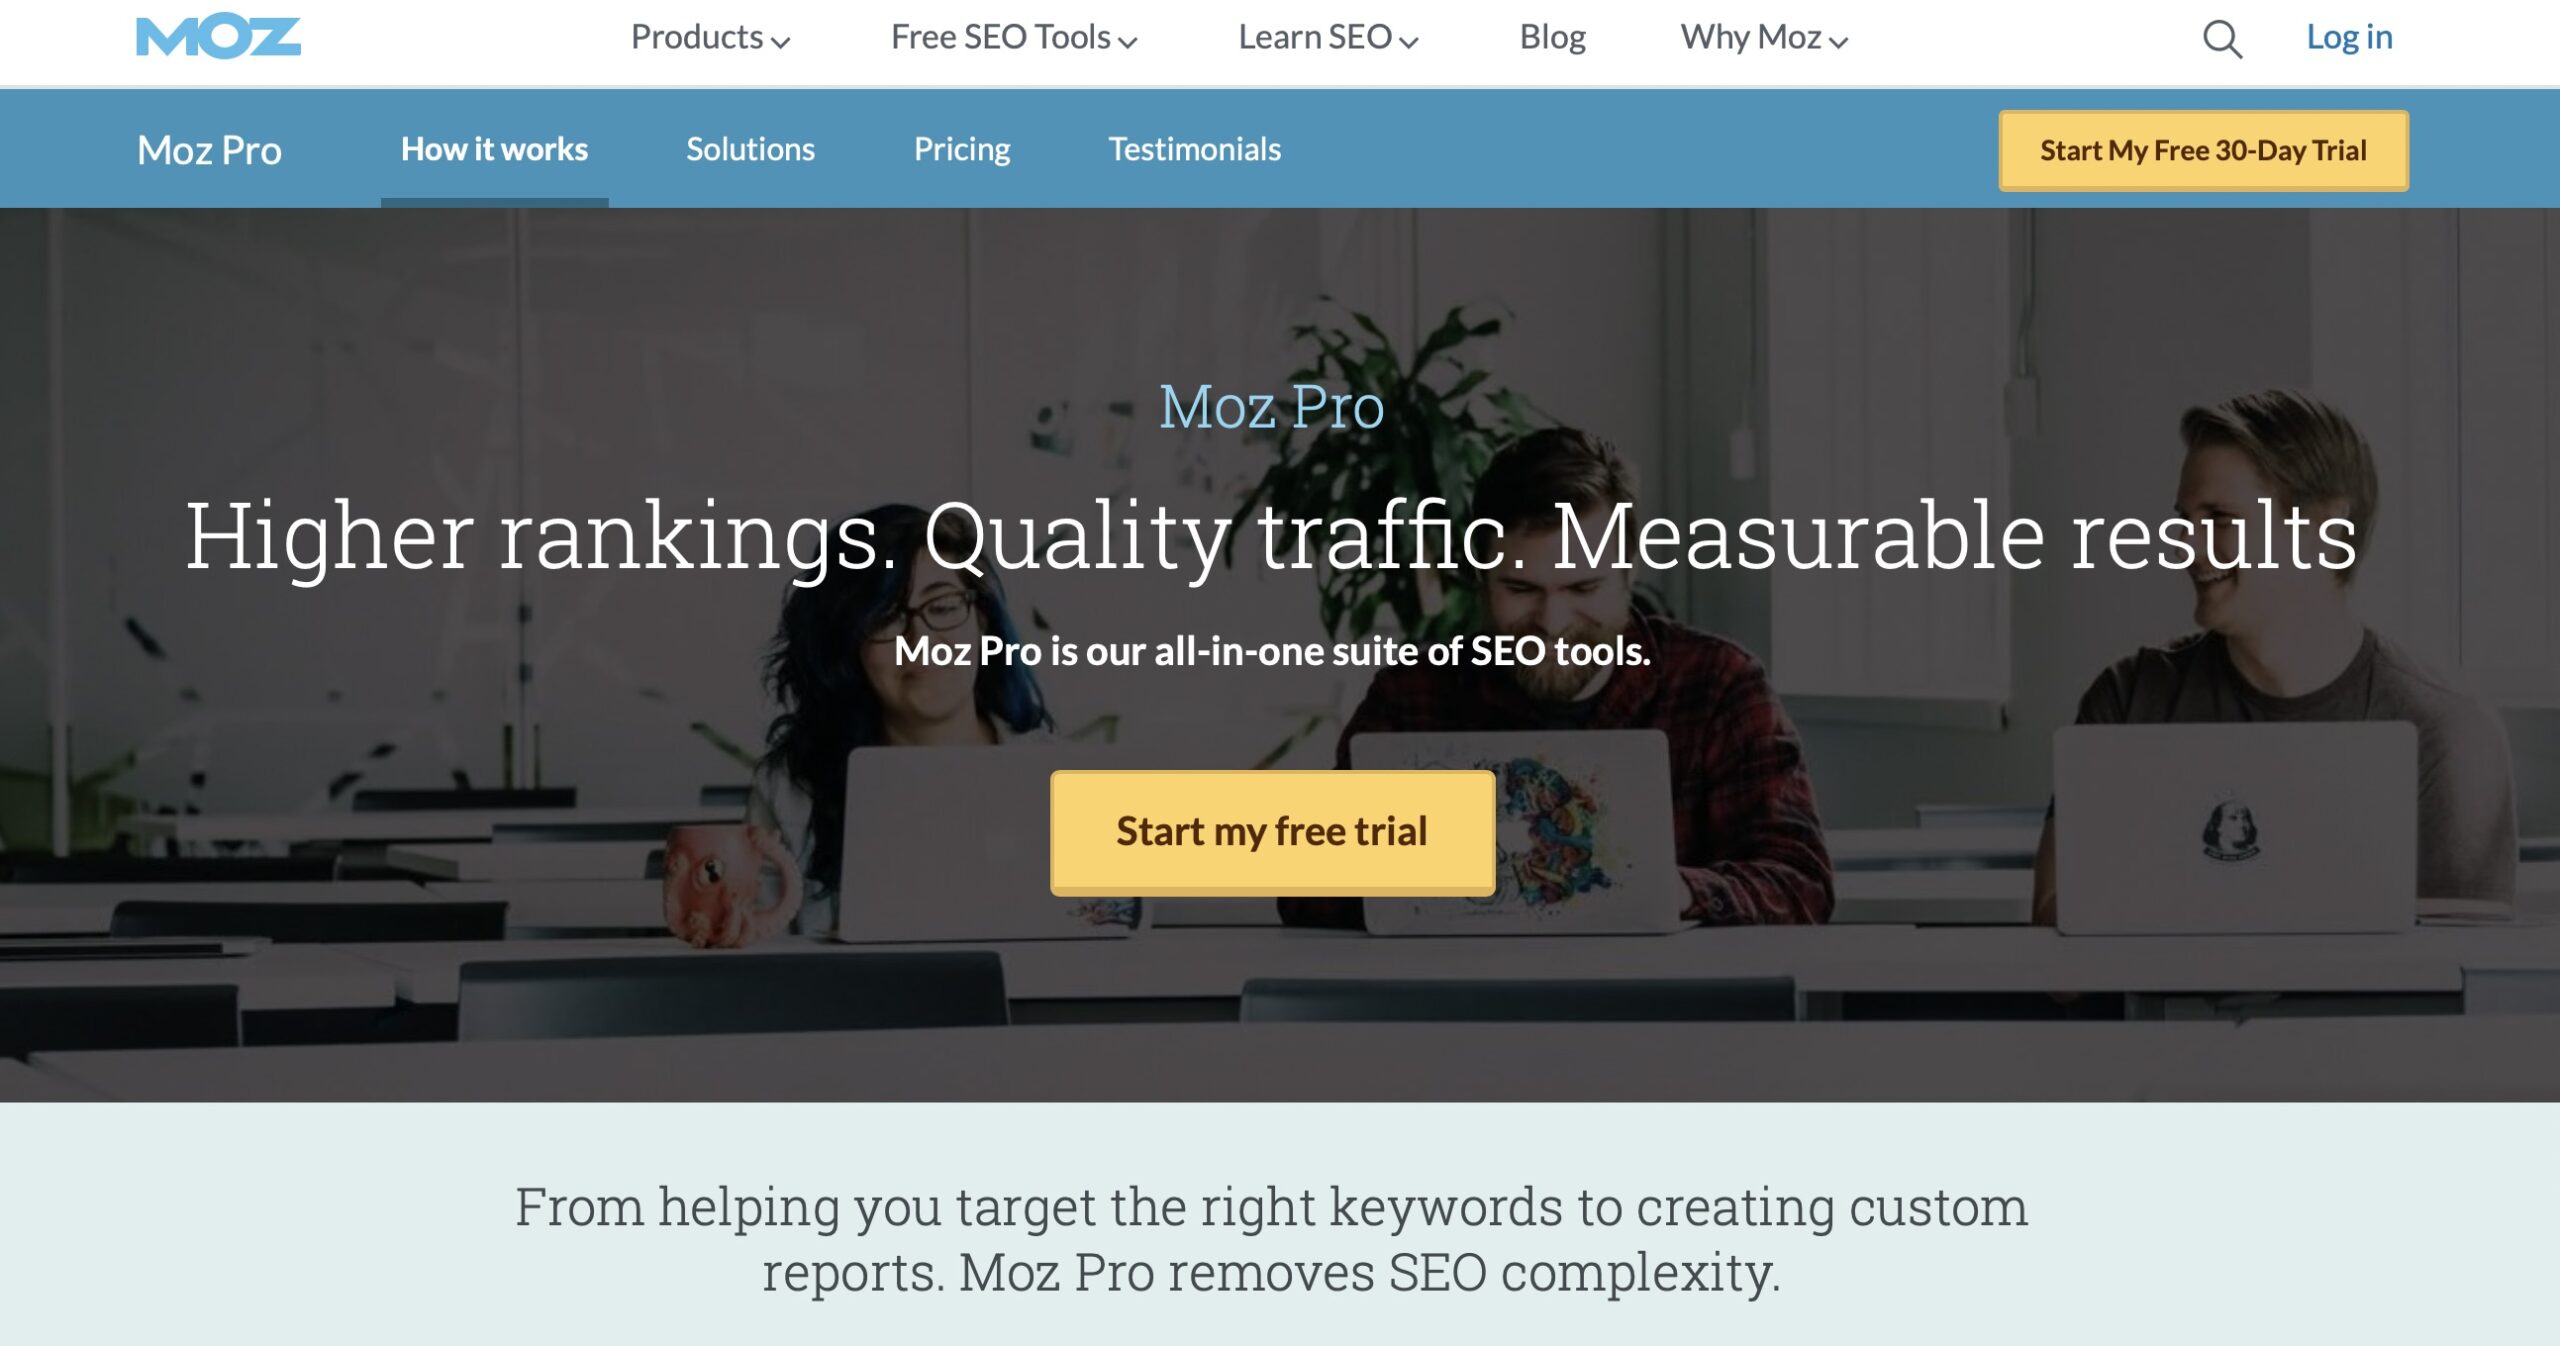 5 SEO Tools For Marketers Playing The Long Game